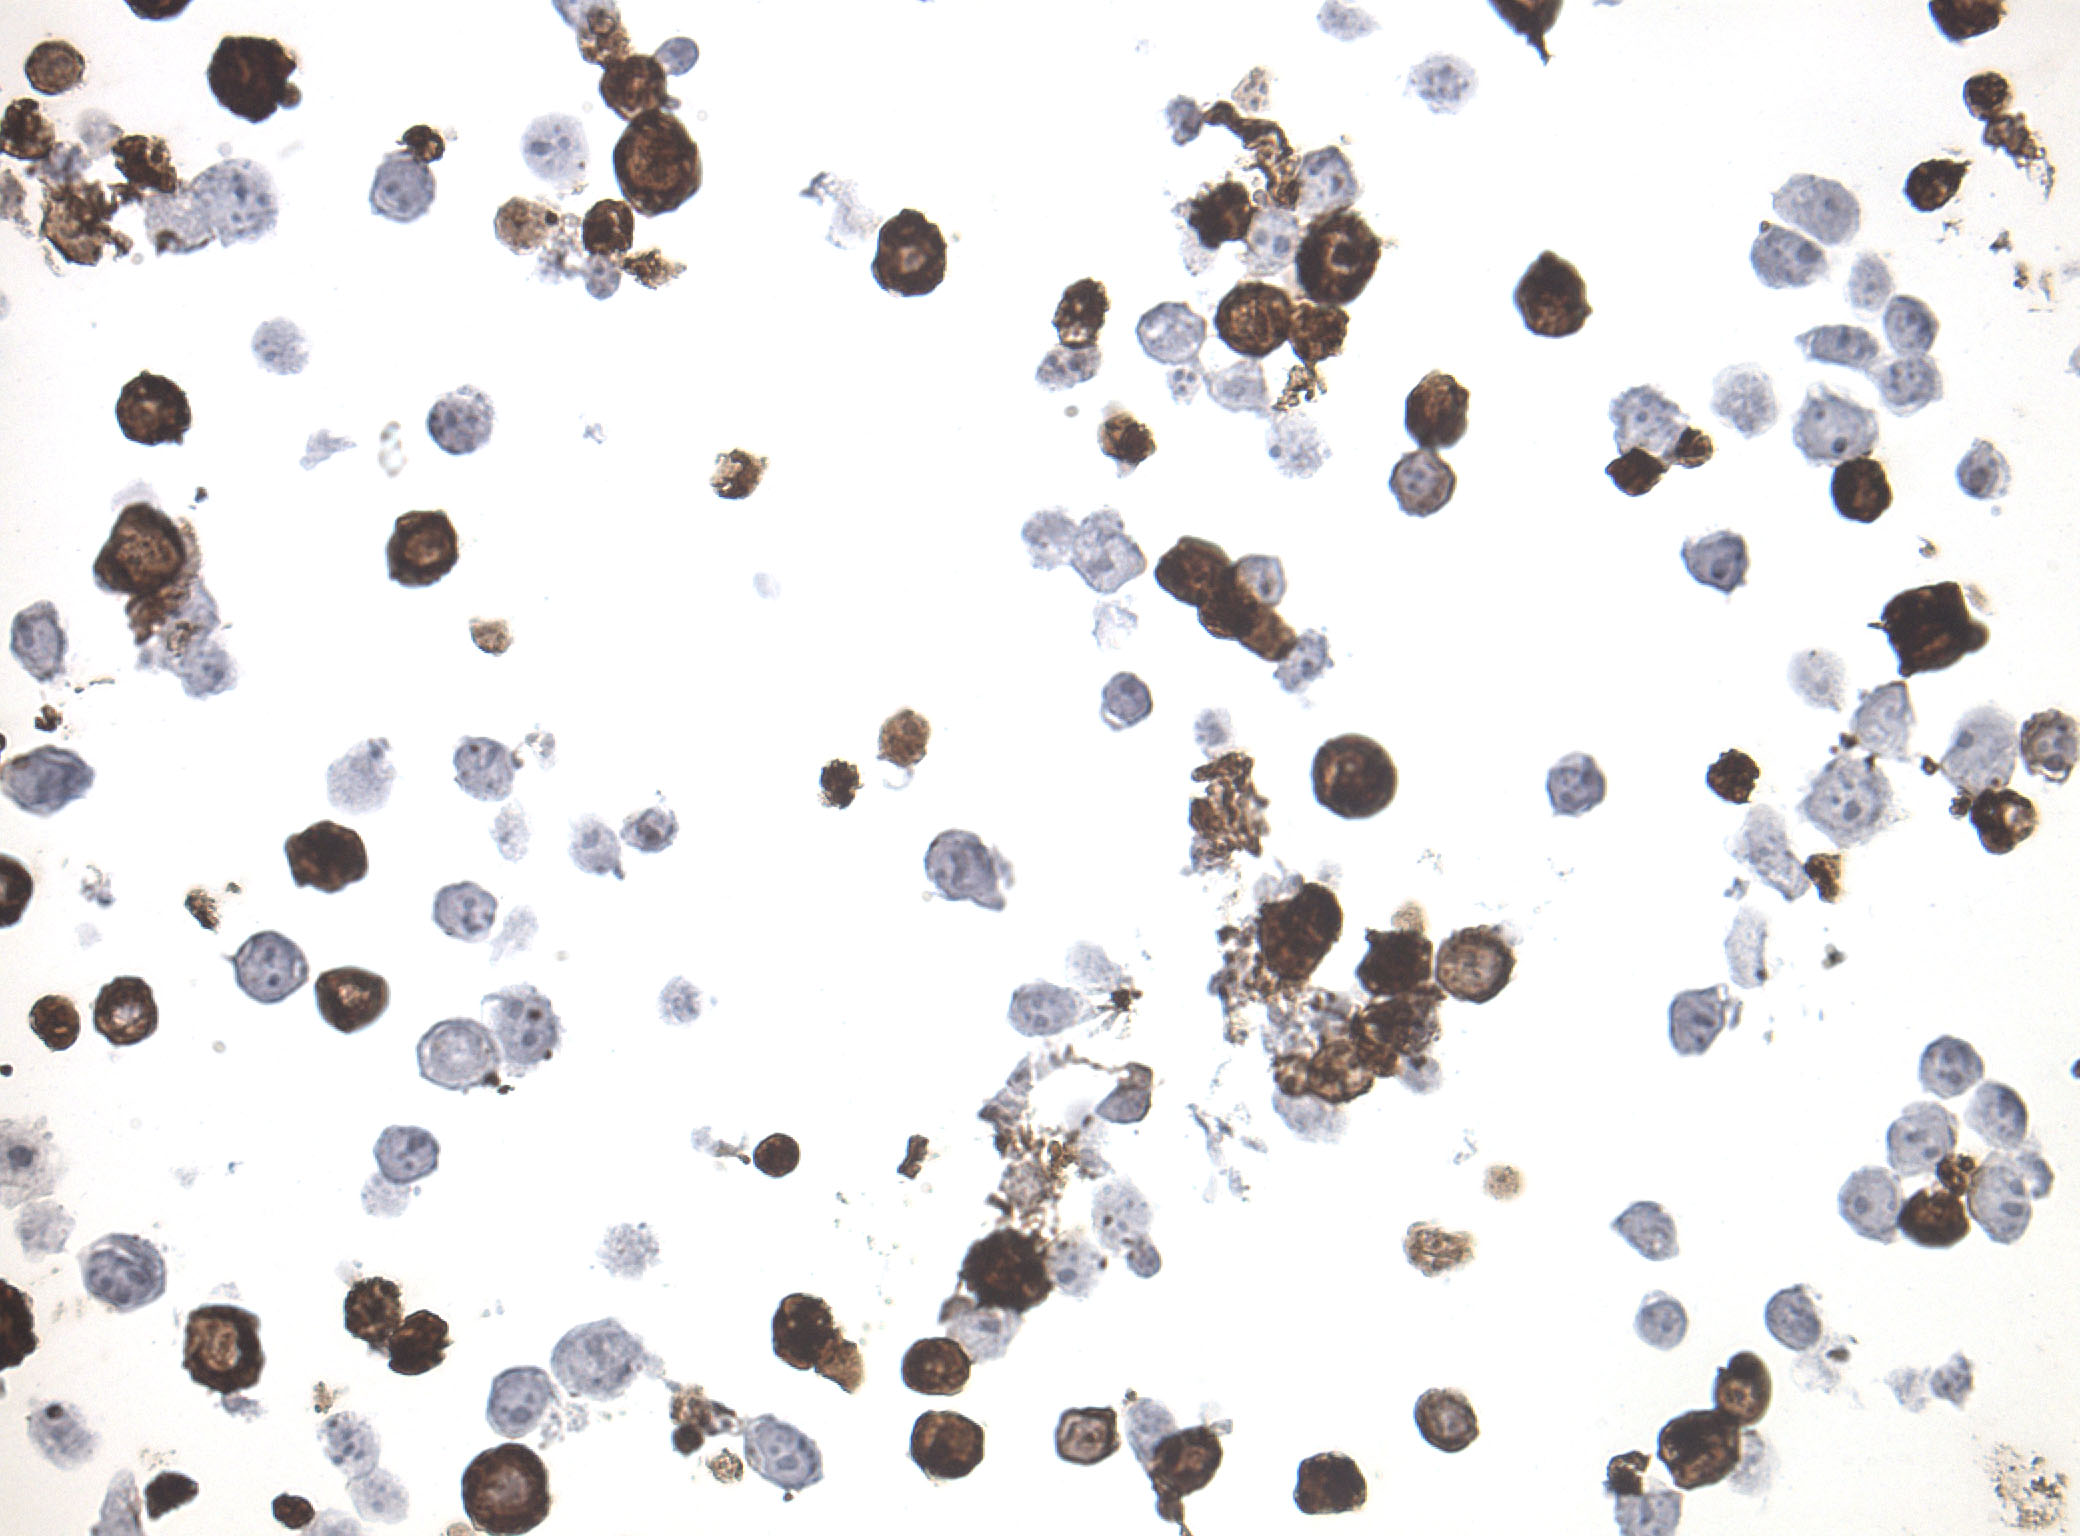 Immunohistology staining on PCDHA4 overexpressed cytosection TS411327P5 with mouse anti DDK clone OTI11C3 C/N TA180144 at 1:400 dilution 4C O/N. Antibody staining was achieved with HIER Citrate pH6 , Polink1 with DAB chromogen detection kit (D11-18). Positive stain shown with the brown chromogen present. HEK293T cells were transfected with cDNA clone RC211327, 5 micron sections, 40x magnification